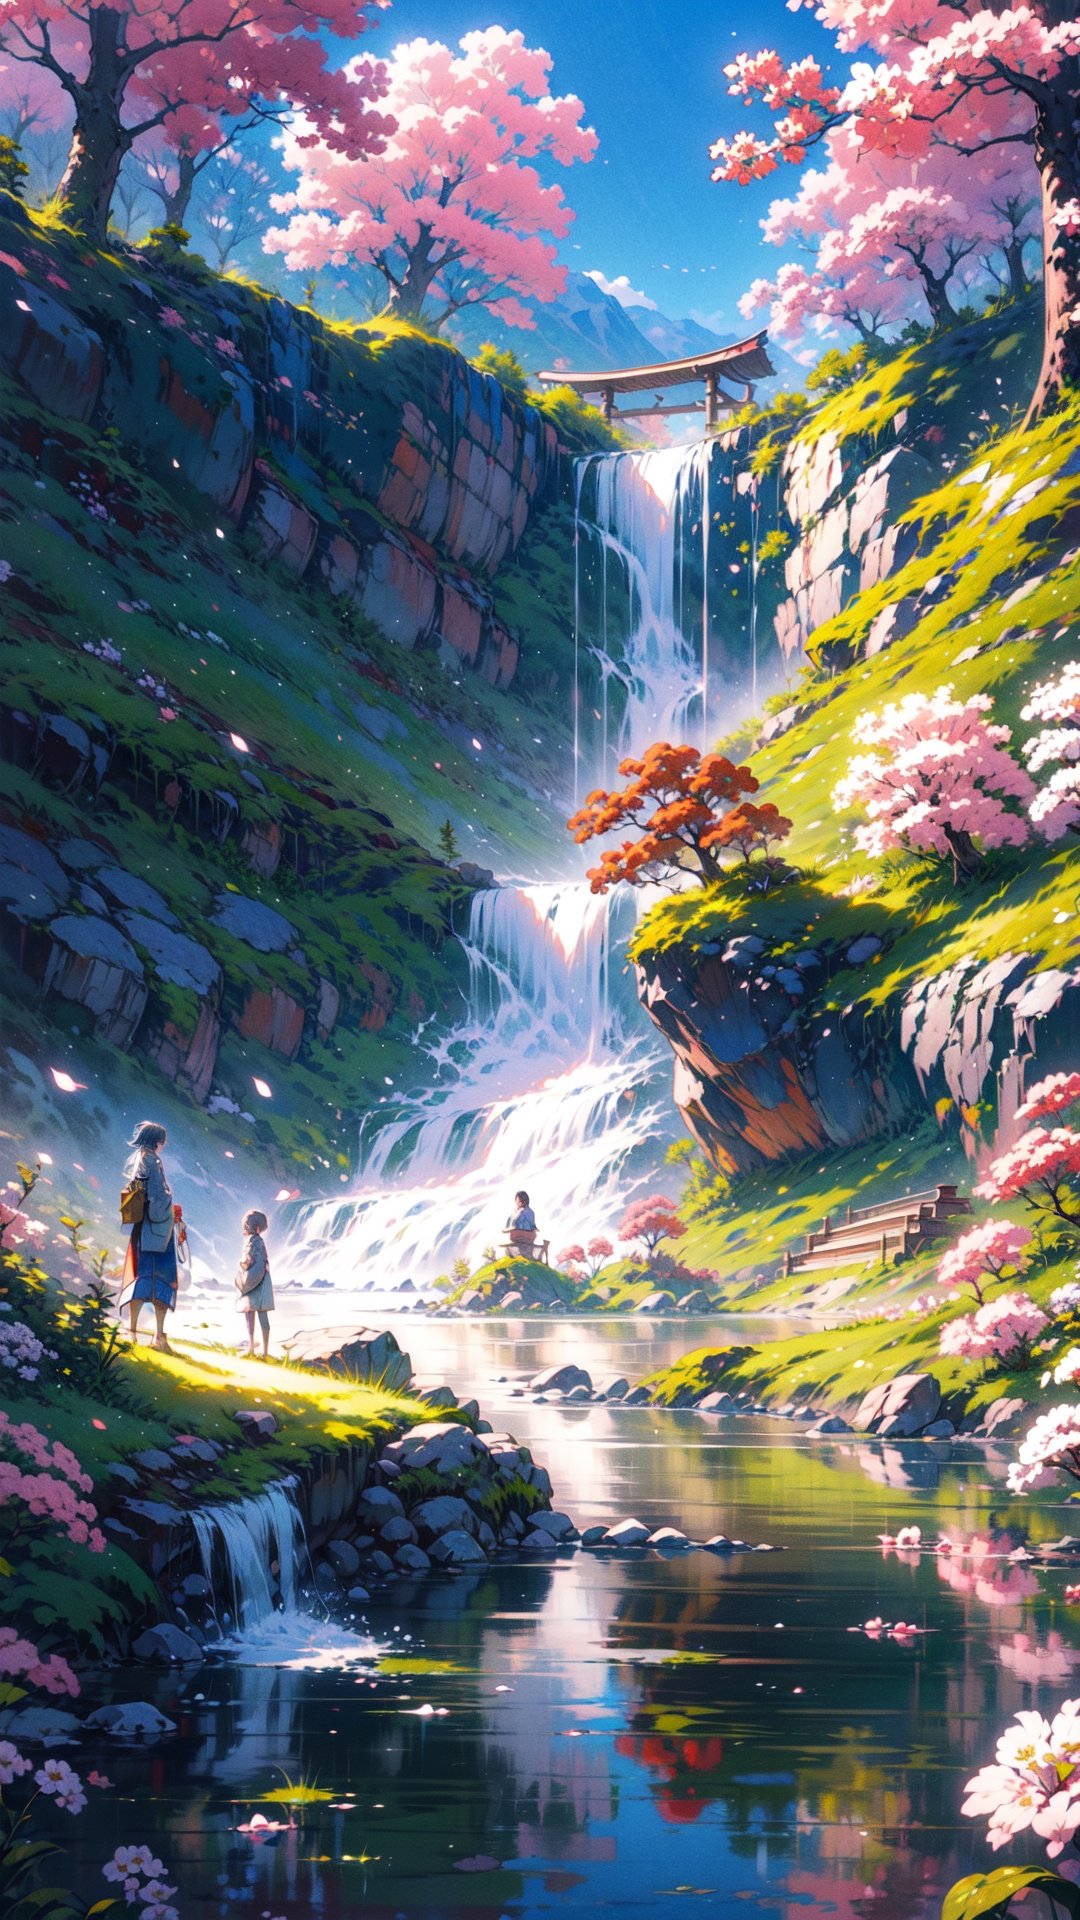 (best quality), (high resolution), (4k resolution), The image is a digital painting of a serene and beautiful landscape. It captures the tranquility of a waterfall cascading down a mountain in the background, with a stone bridge in the foreground. Traditional Japanese buildings, with their characteristic wooden roofs, nestle amidst pink cherry blossom trees, adding a touch of cultural charm. The painting is vertical, lending a sense of depth to the scene. The soft color palette and the peaceful mood of the image evoke a sense of calm and harmony. This artwork is a testament to the beauty of nature and traditional architecture, seamlessly blending them into a captivating visual narrative.,sle,EpicArt,ayaka_genshin